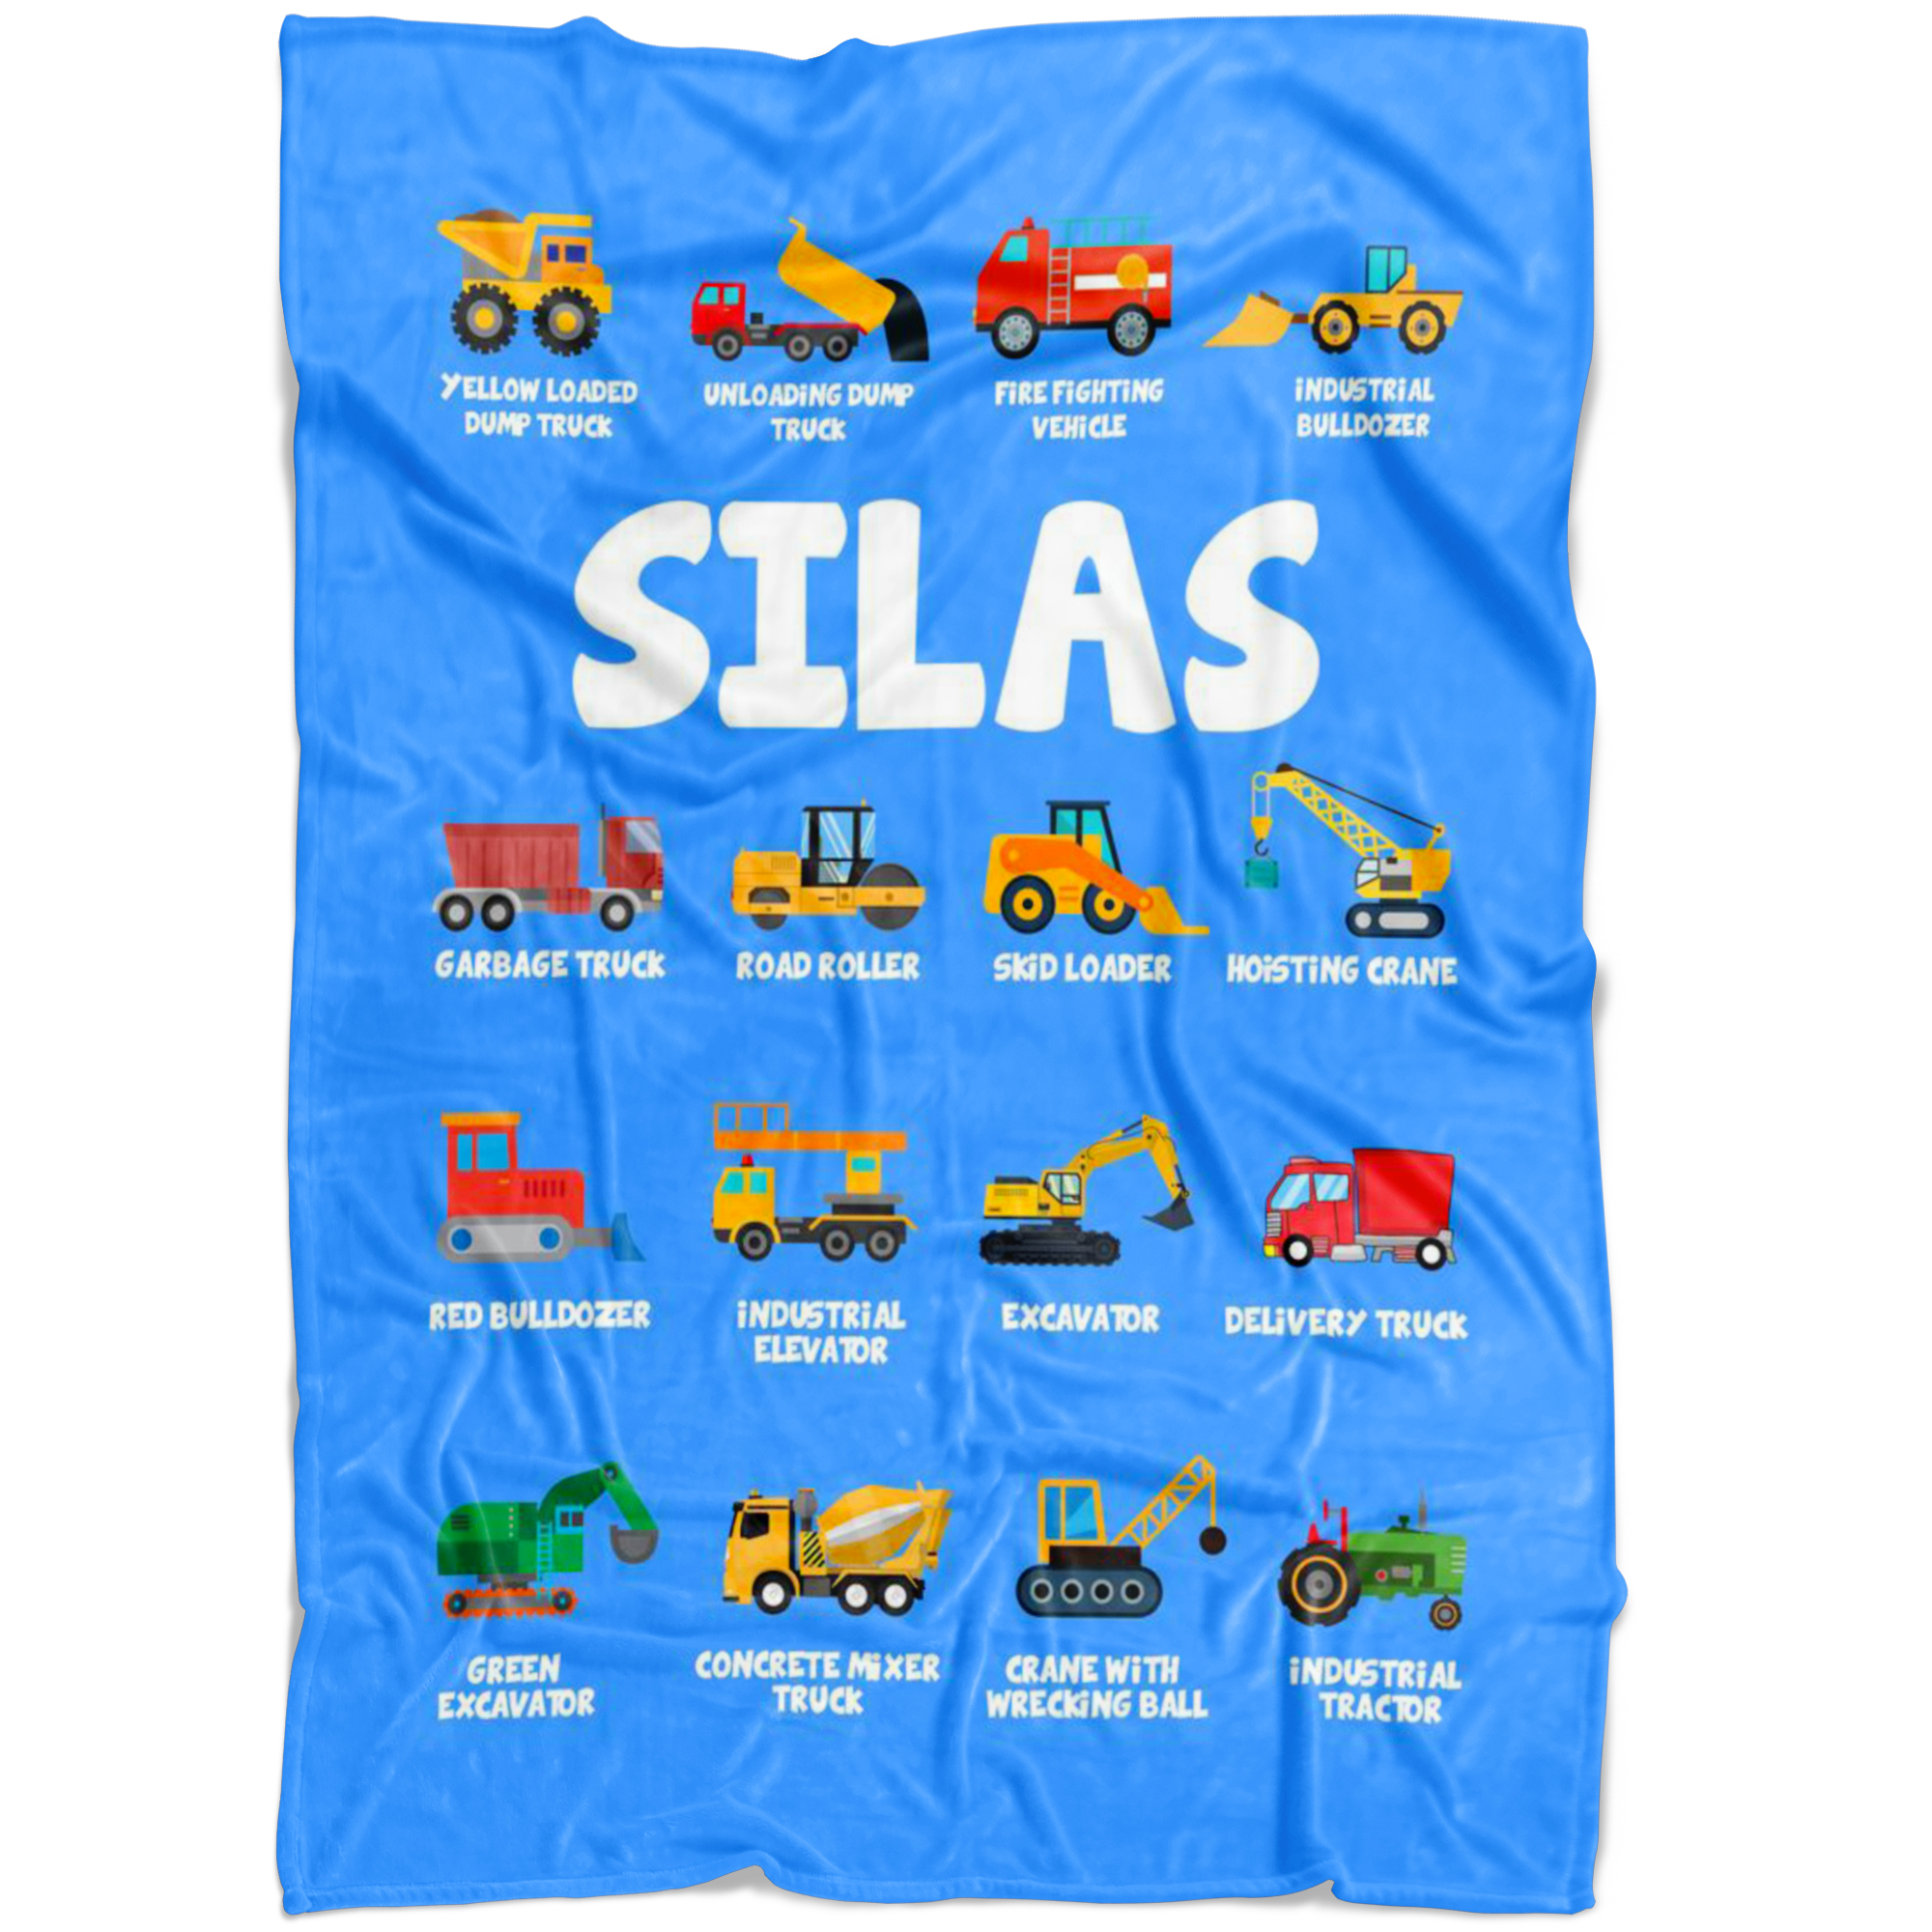 SILAS Construction Blanket Blue